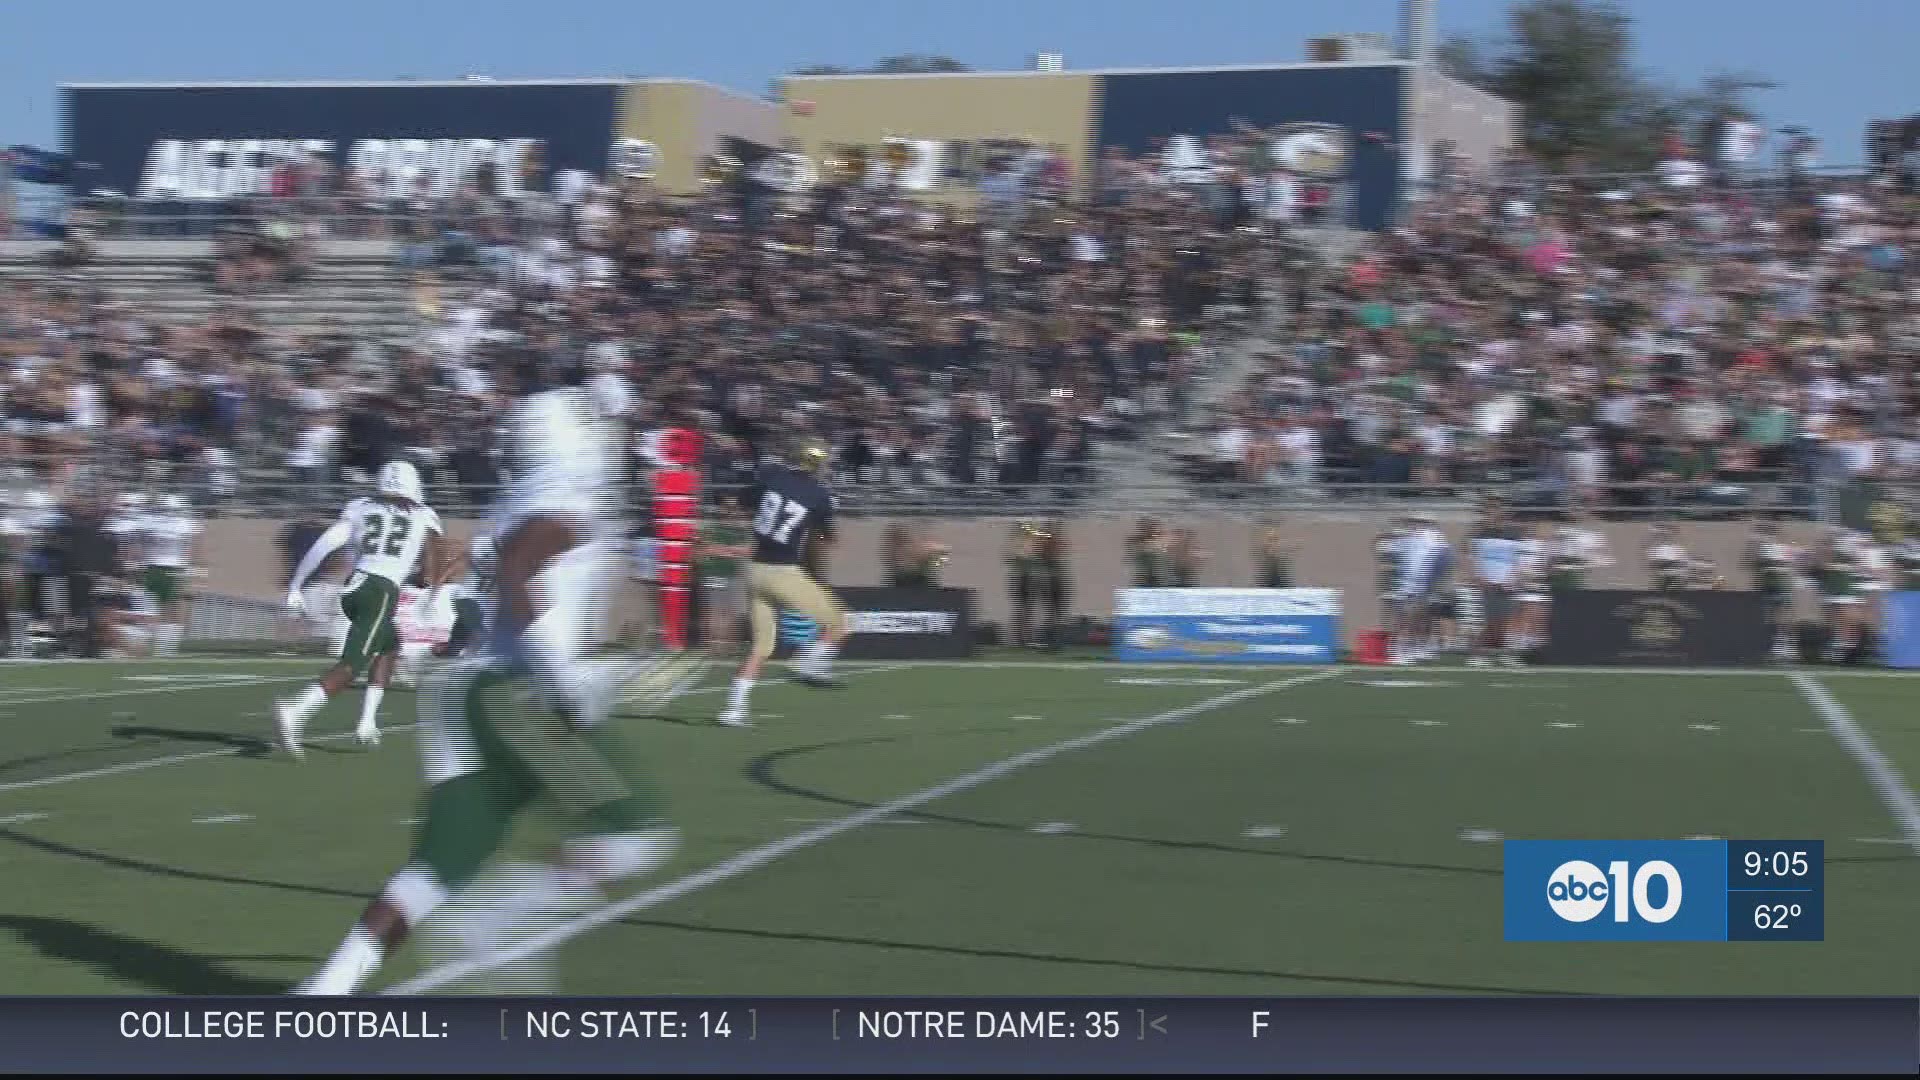 In the Battle for the Horseshoe rivalry game against Cal Poly, the UC Davis Aggies score on their first three possessions en route to a 31-28 win.